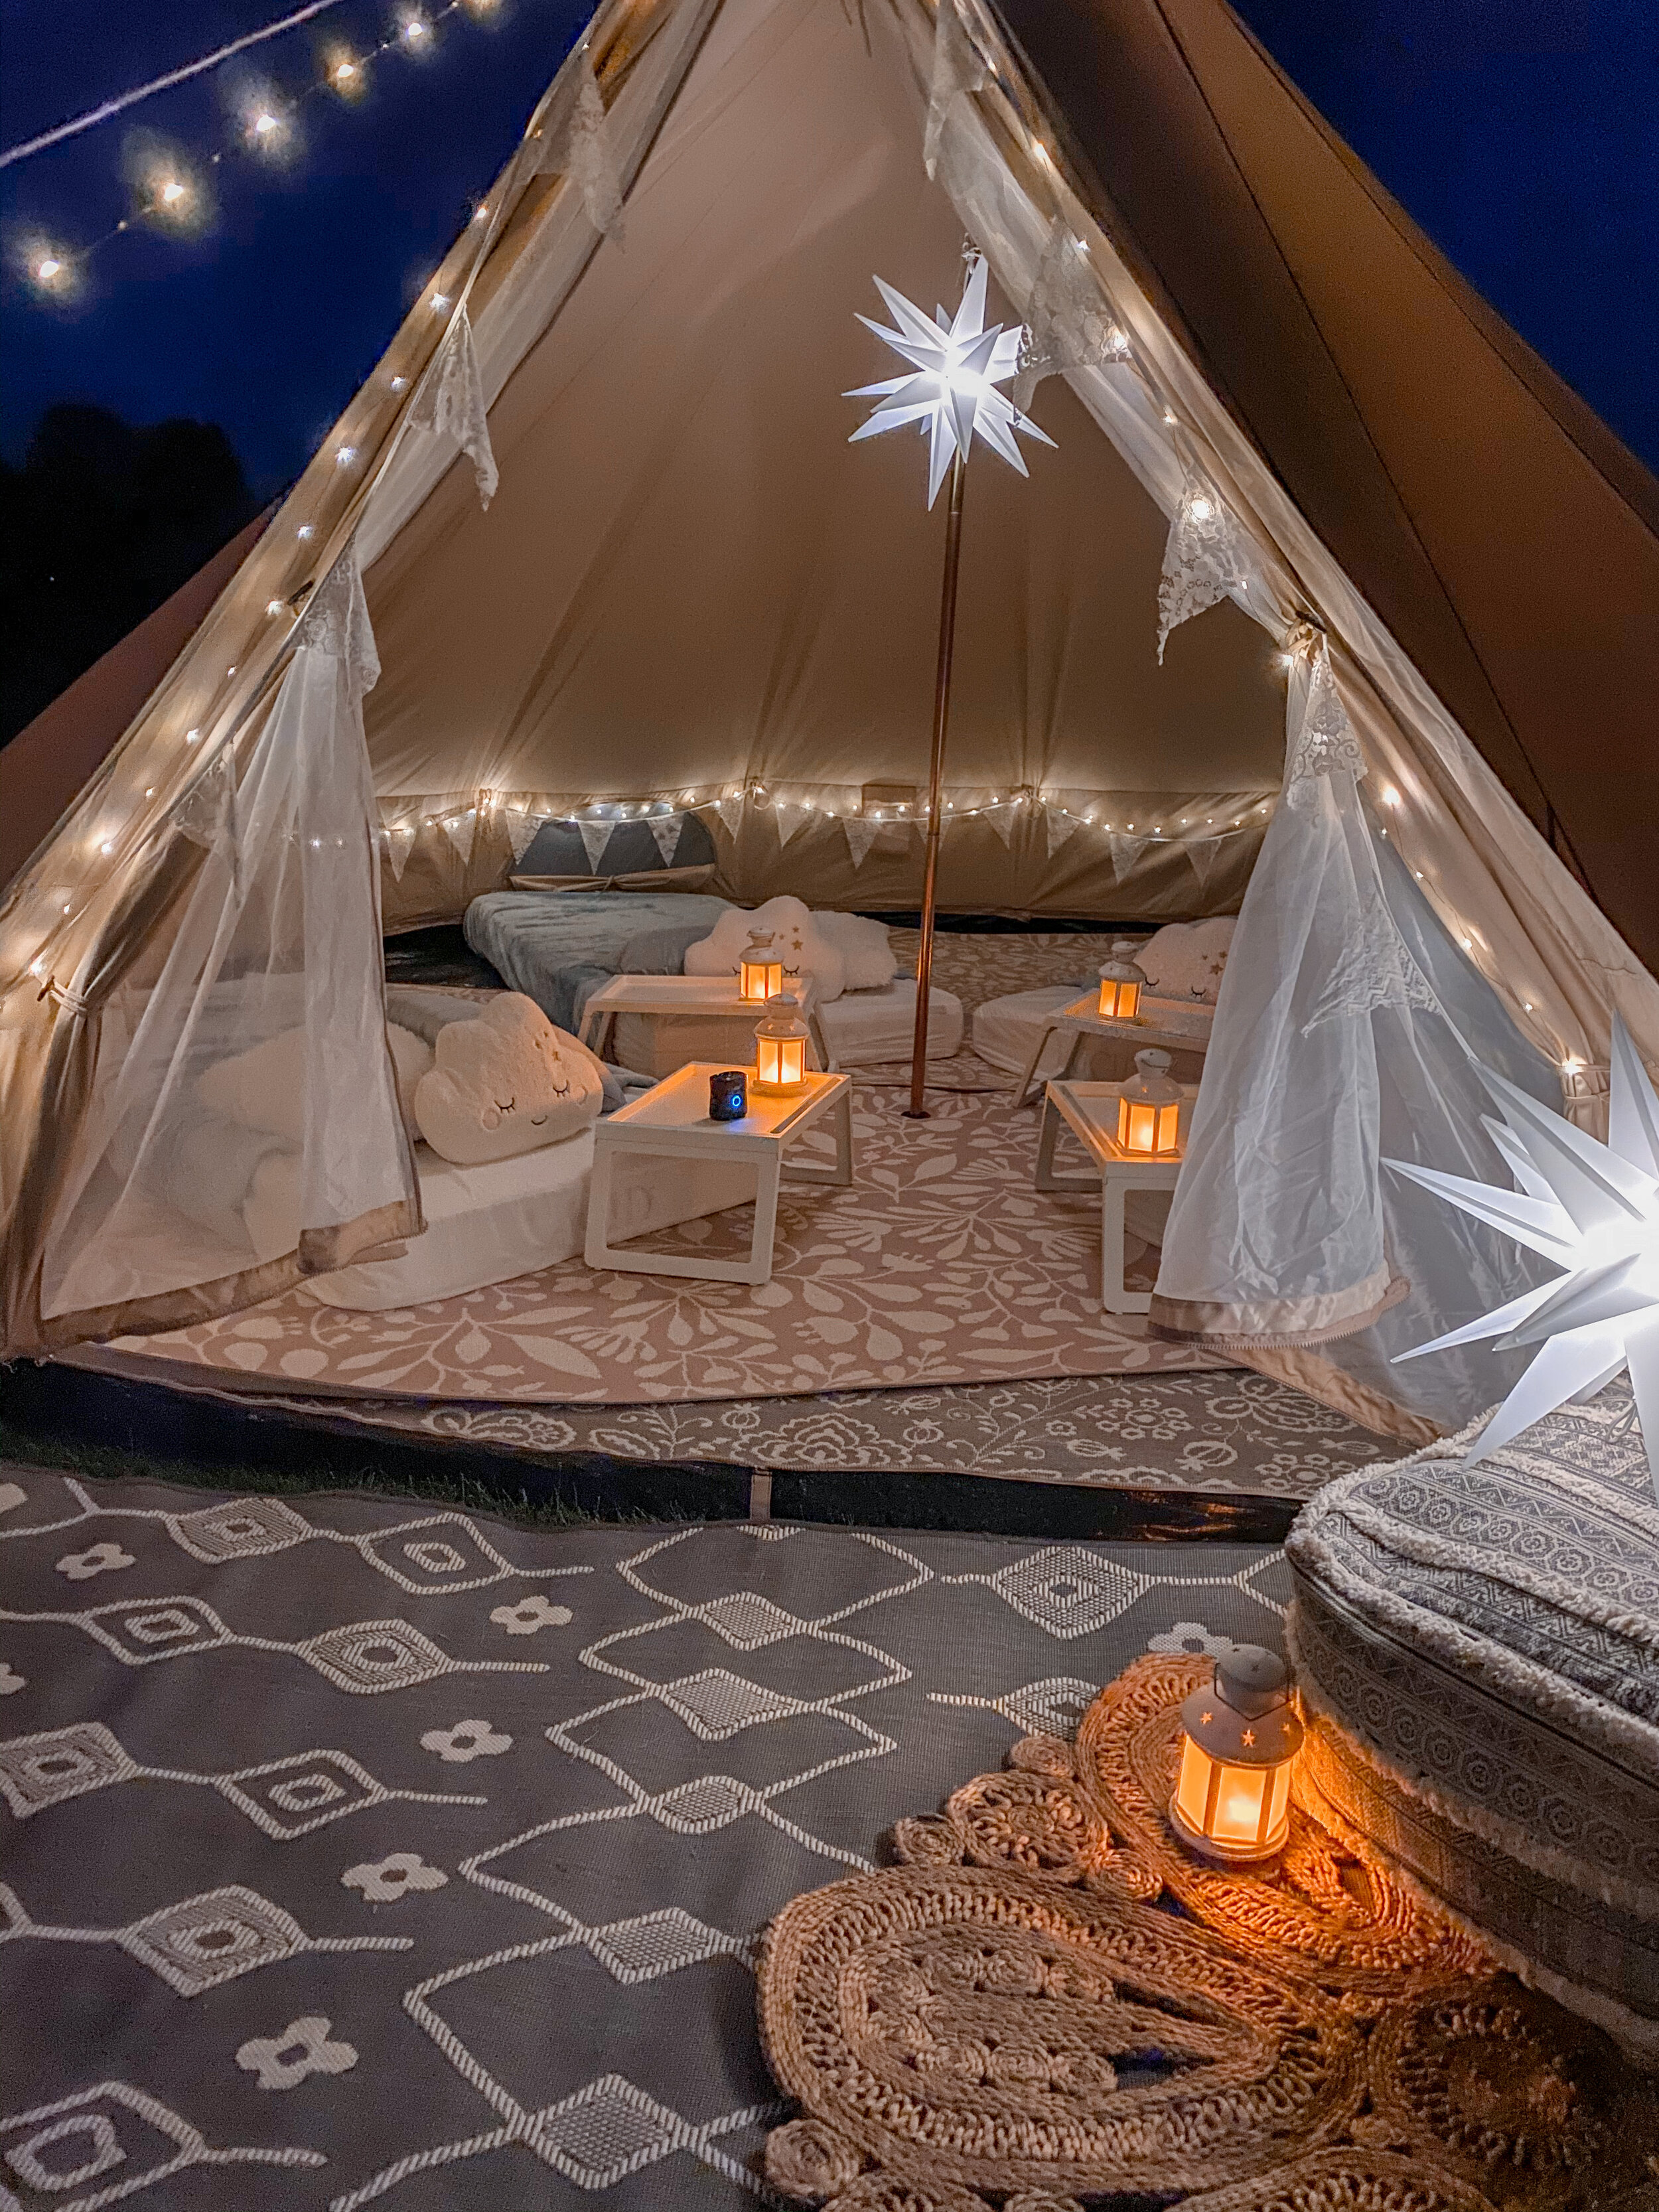 Camping Tent Lighting Ideas  Tent glamping, Camping lights